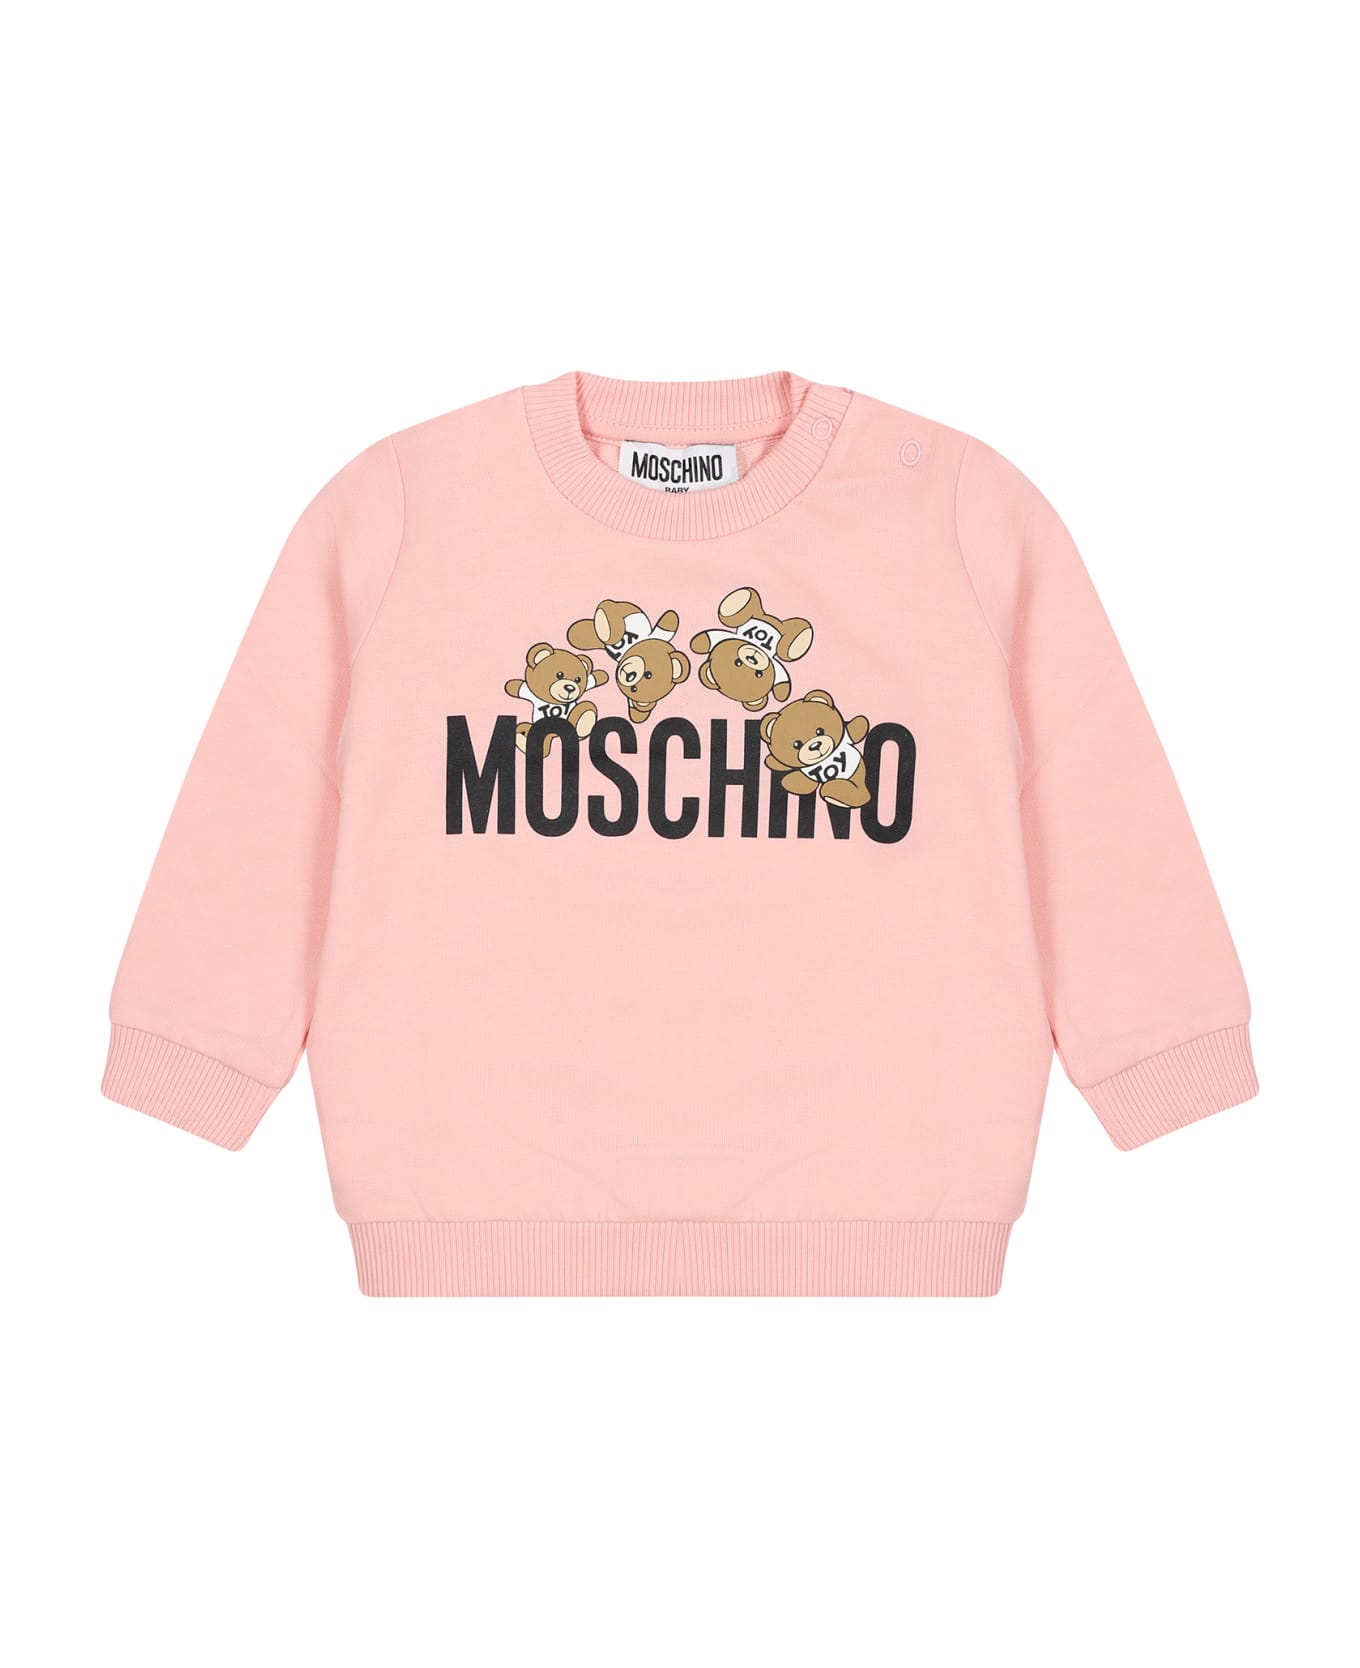 Moschino Pink Sweatshirt For Babies With Teddy Bears And Logo - Pink